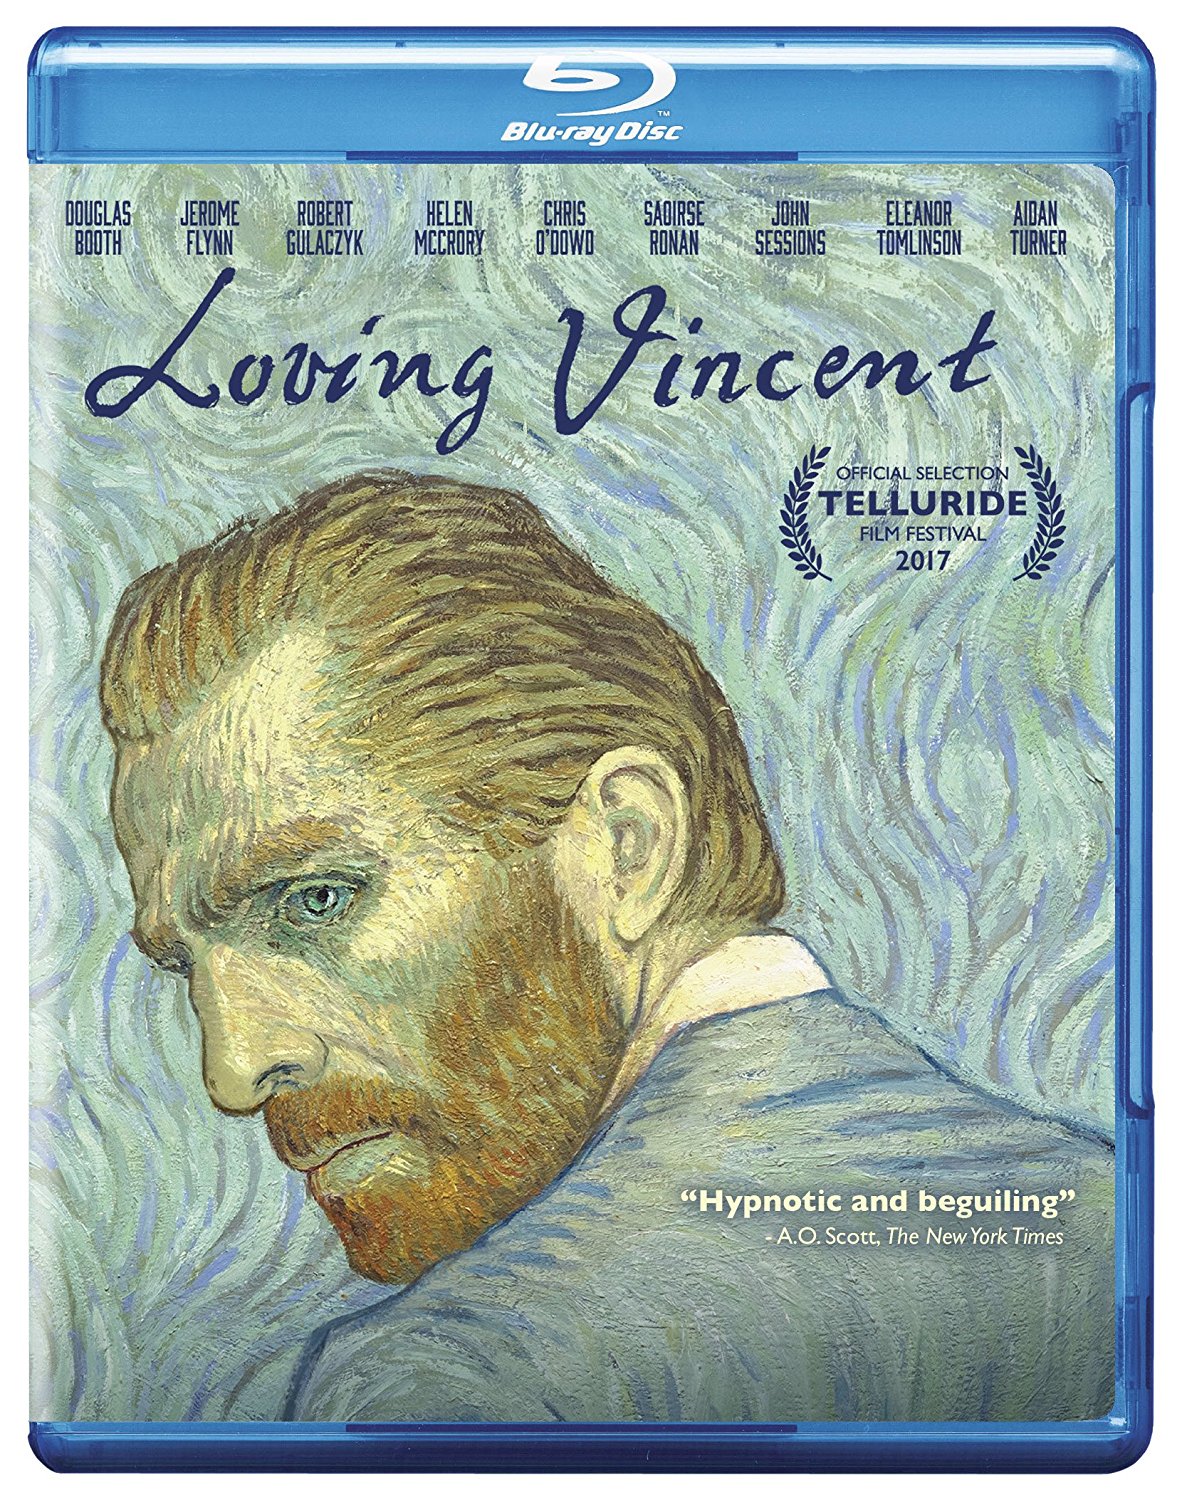 Loving Vincent Blu-Ray Combo cover